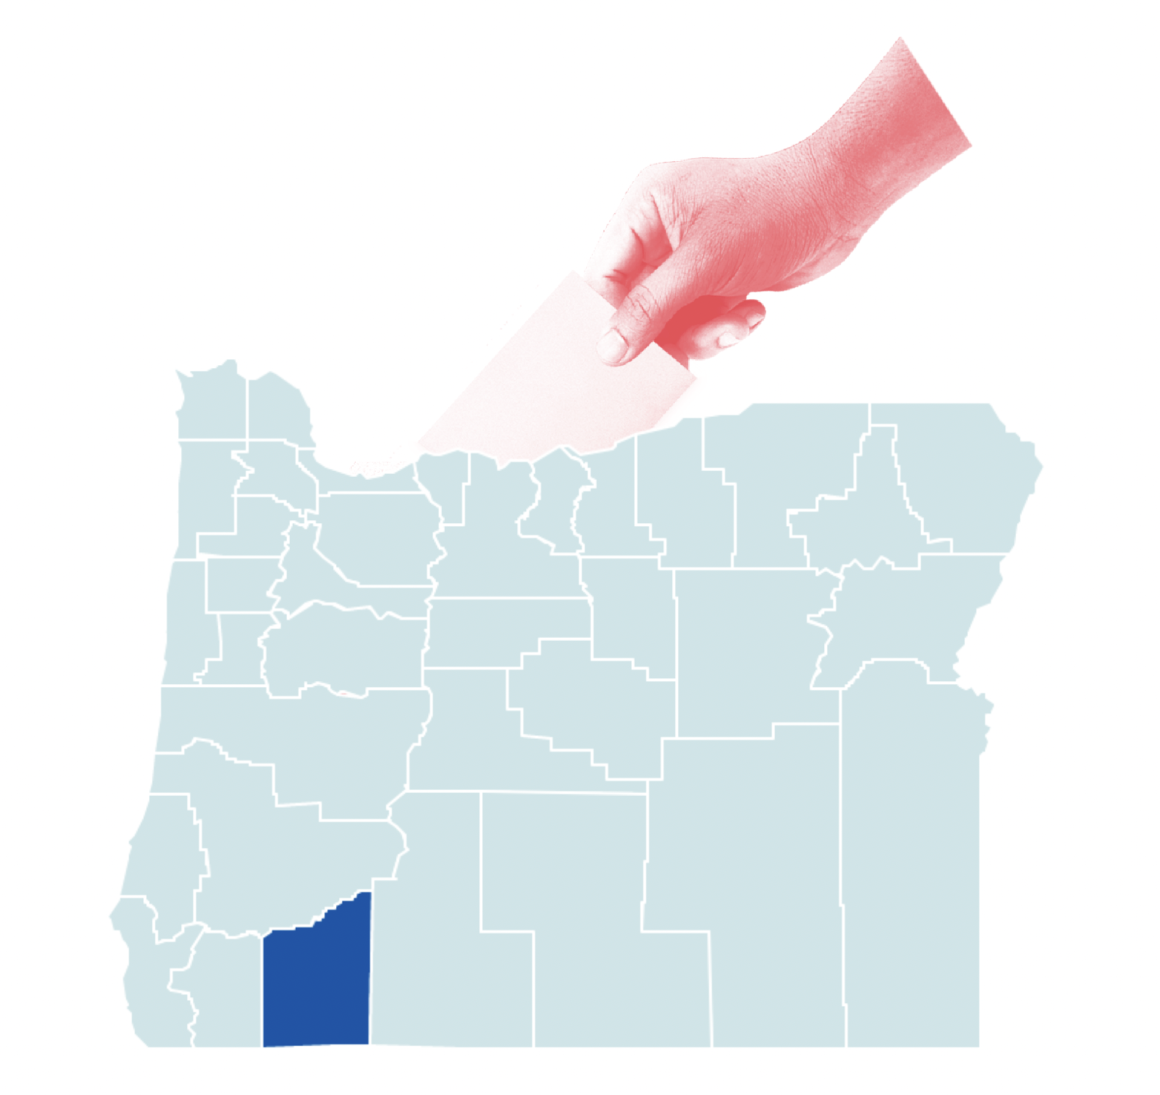 Jackson County, highlighted on an Oregon county map, with a hand dropping a ballot into the state outline.